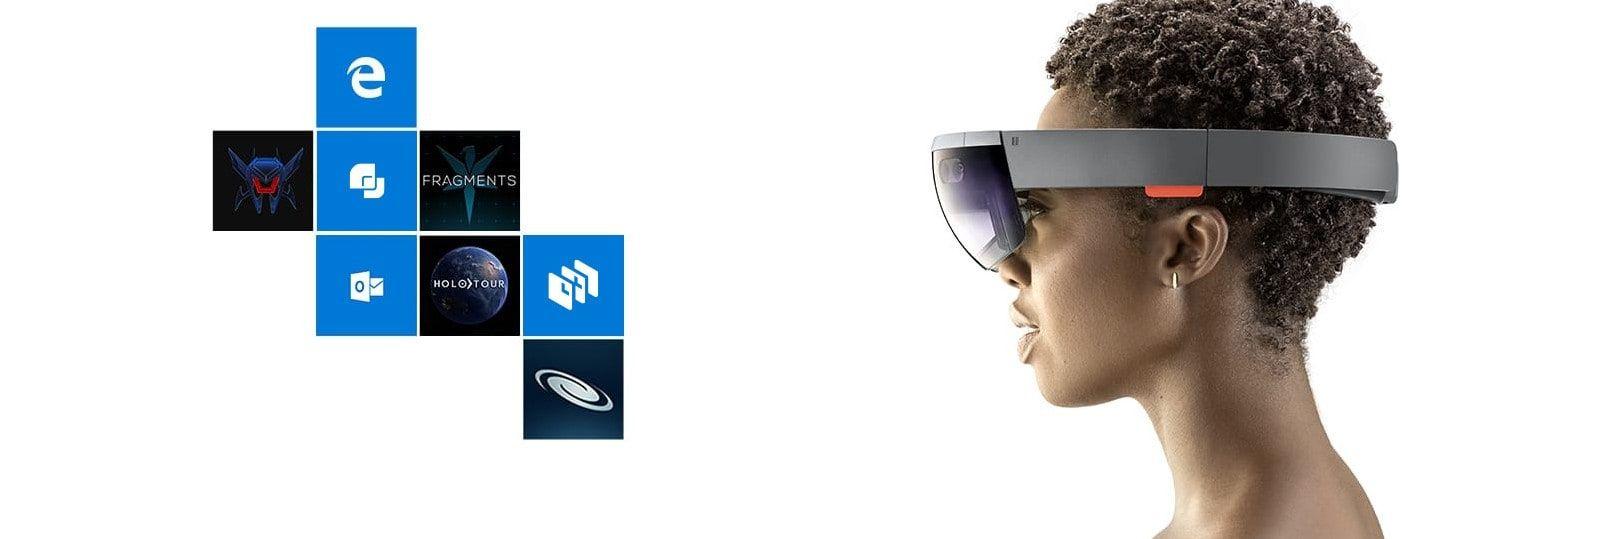 Hololens Logo - Microsoft HoloLens | The leader in mixed reality technology